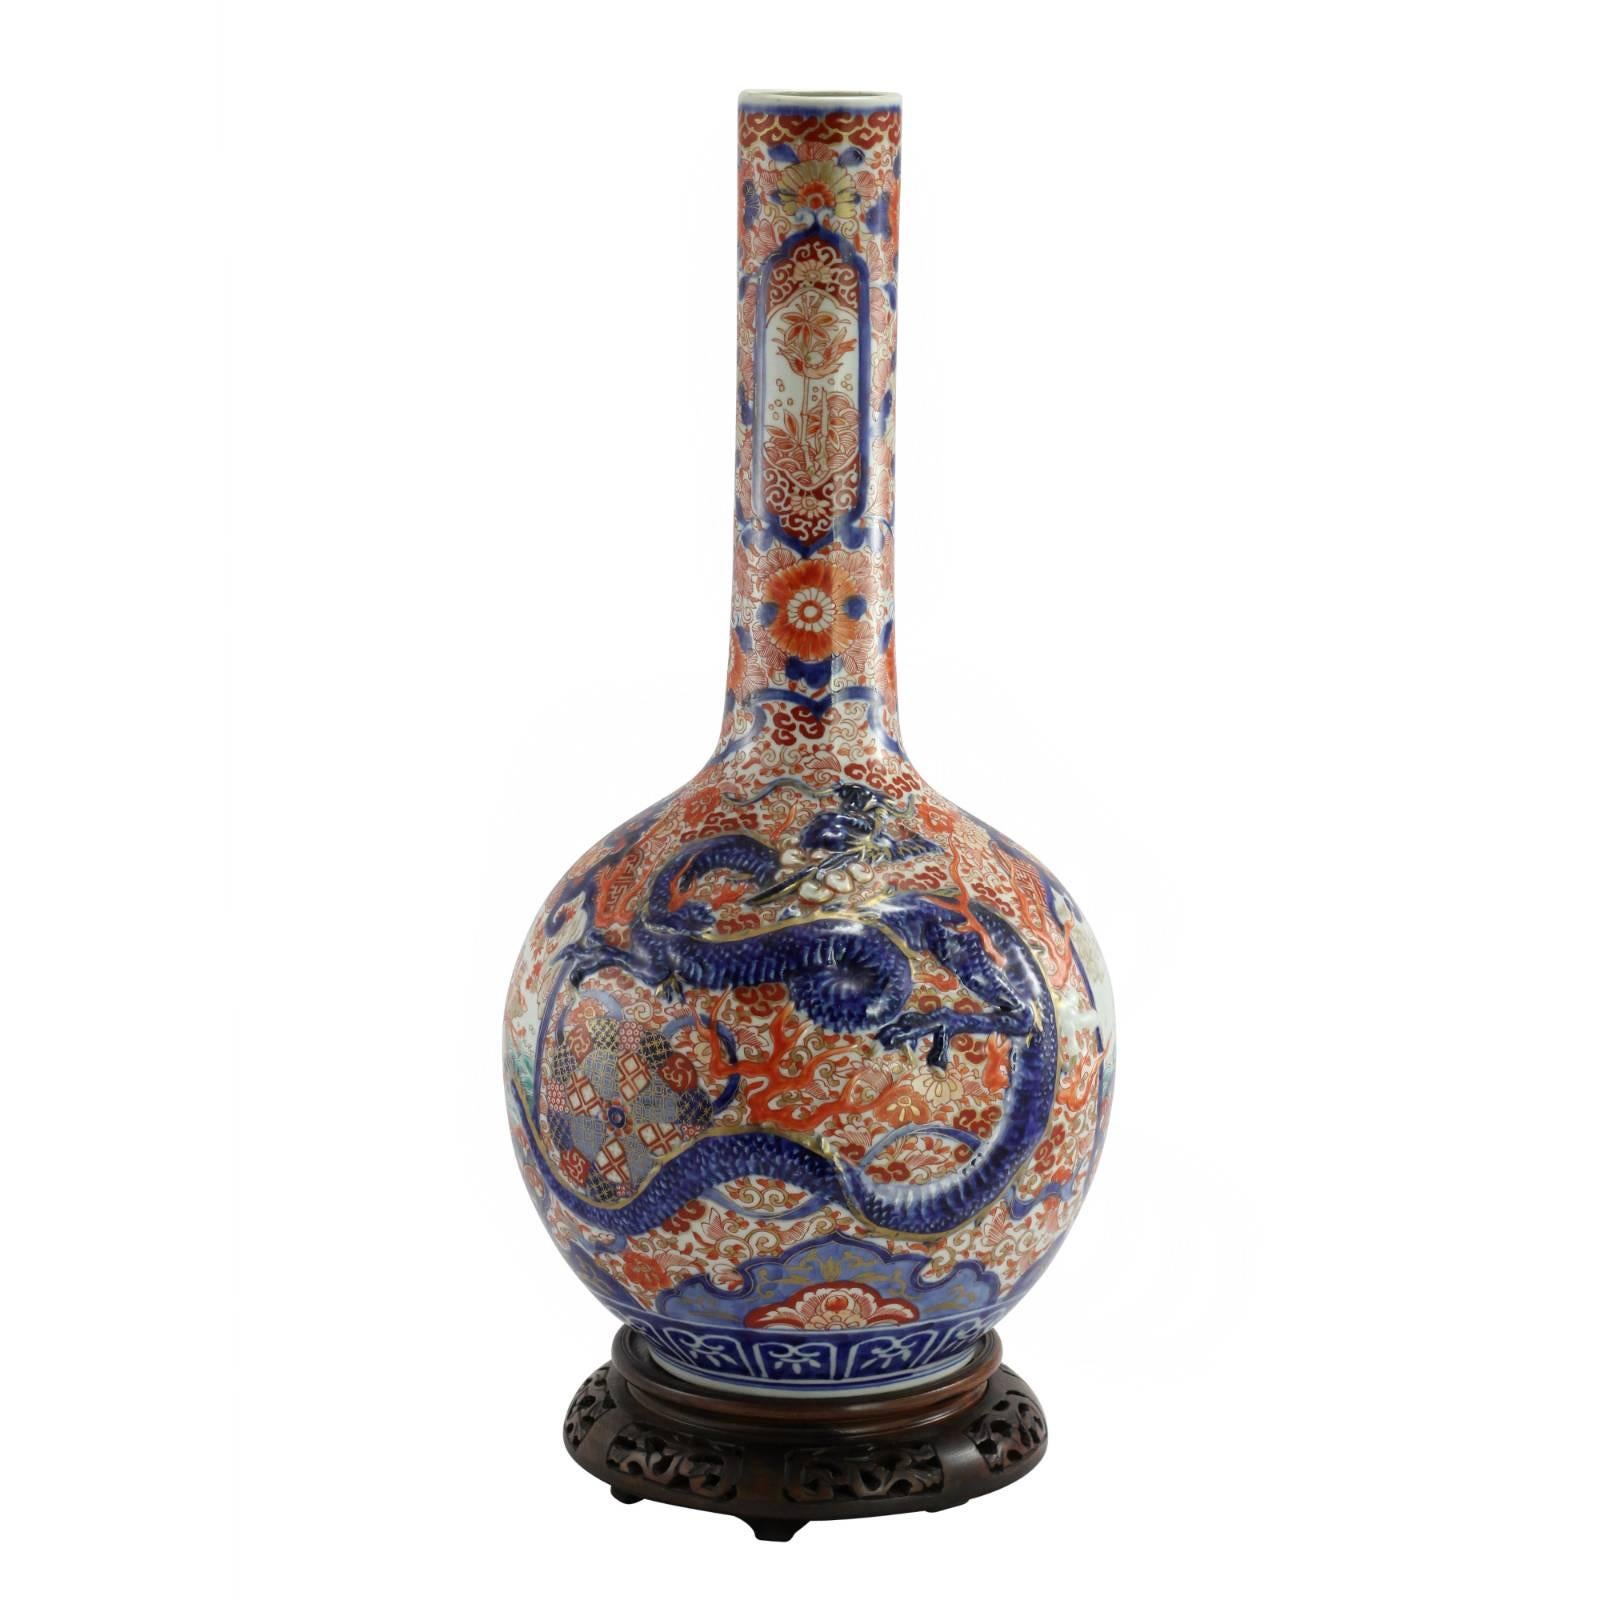 A Japanese Imari bottle vase, dating to the late Meiji era, decorated with a traditional cobalt blue, orange, and gilt gold color scheme. Two opposite sides of the vase feature hand painted panels of a man riding a giant fish (possibly a reference